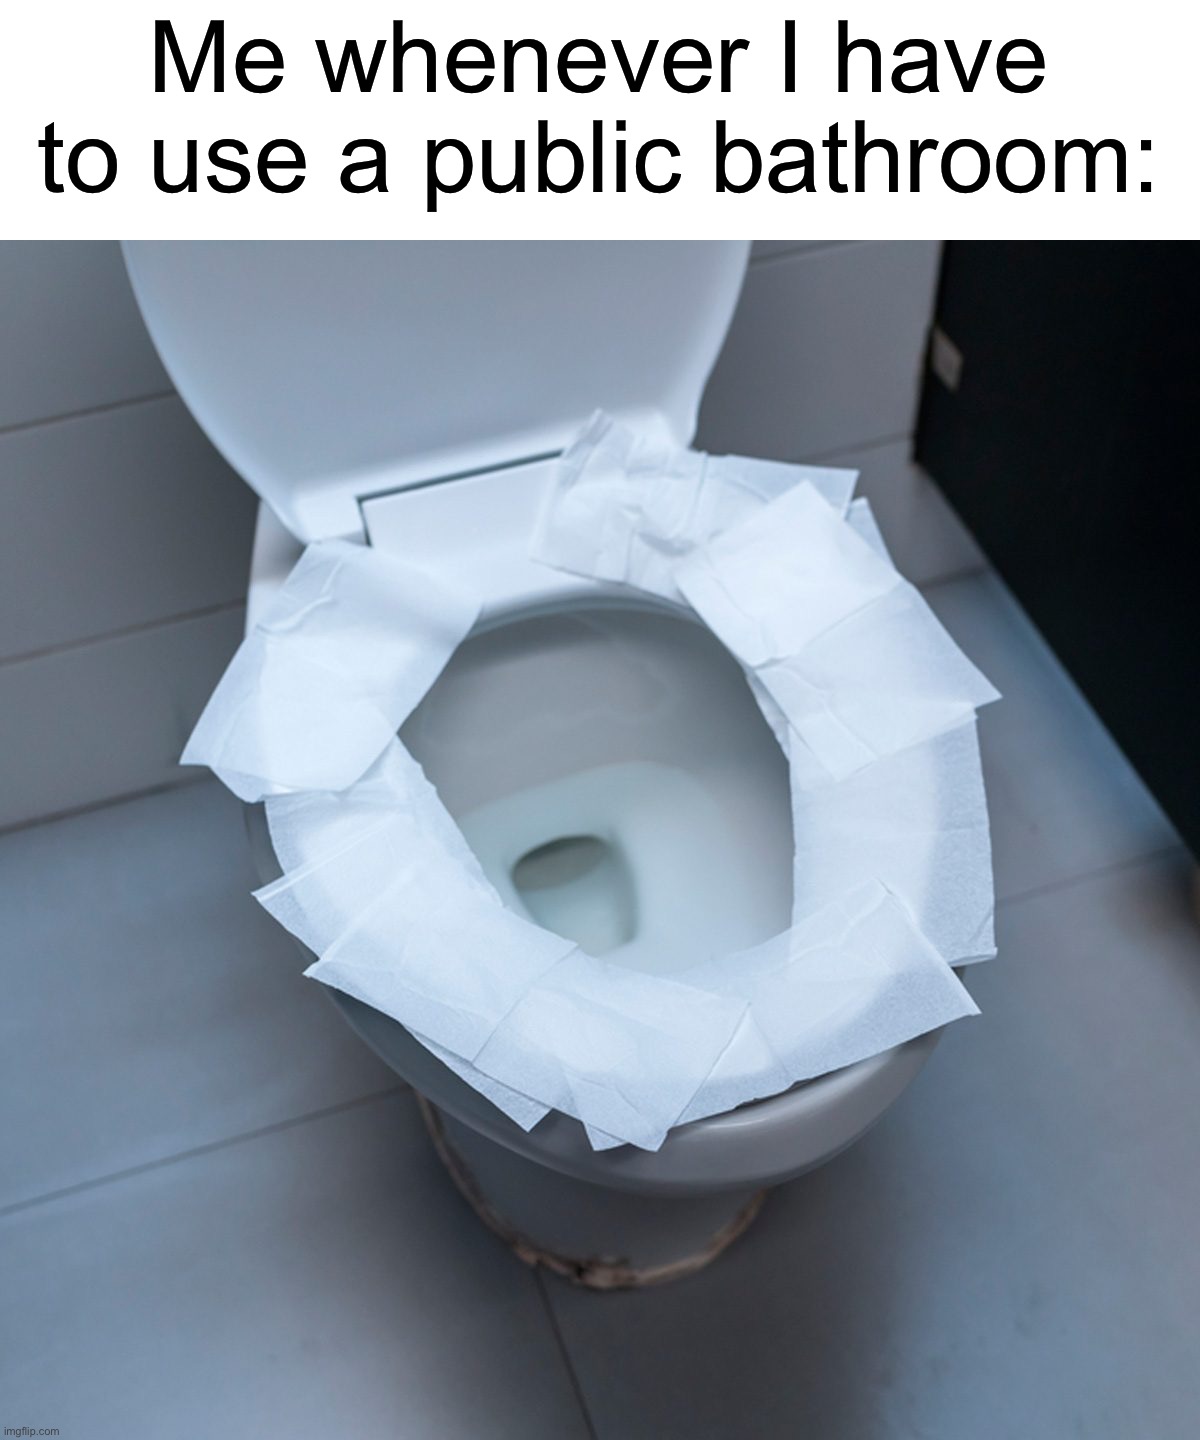 Especially in school, weird stuff is always going on in the bathrooms… | Me whenever I have to use a public bathroom: | image tagged in memes,funny,true story,relatable memes,school,toilet paper | made w/ Imgflip meme maker